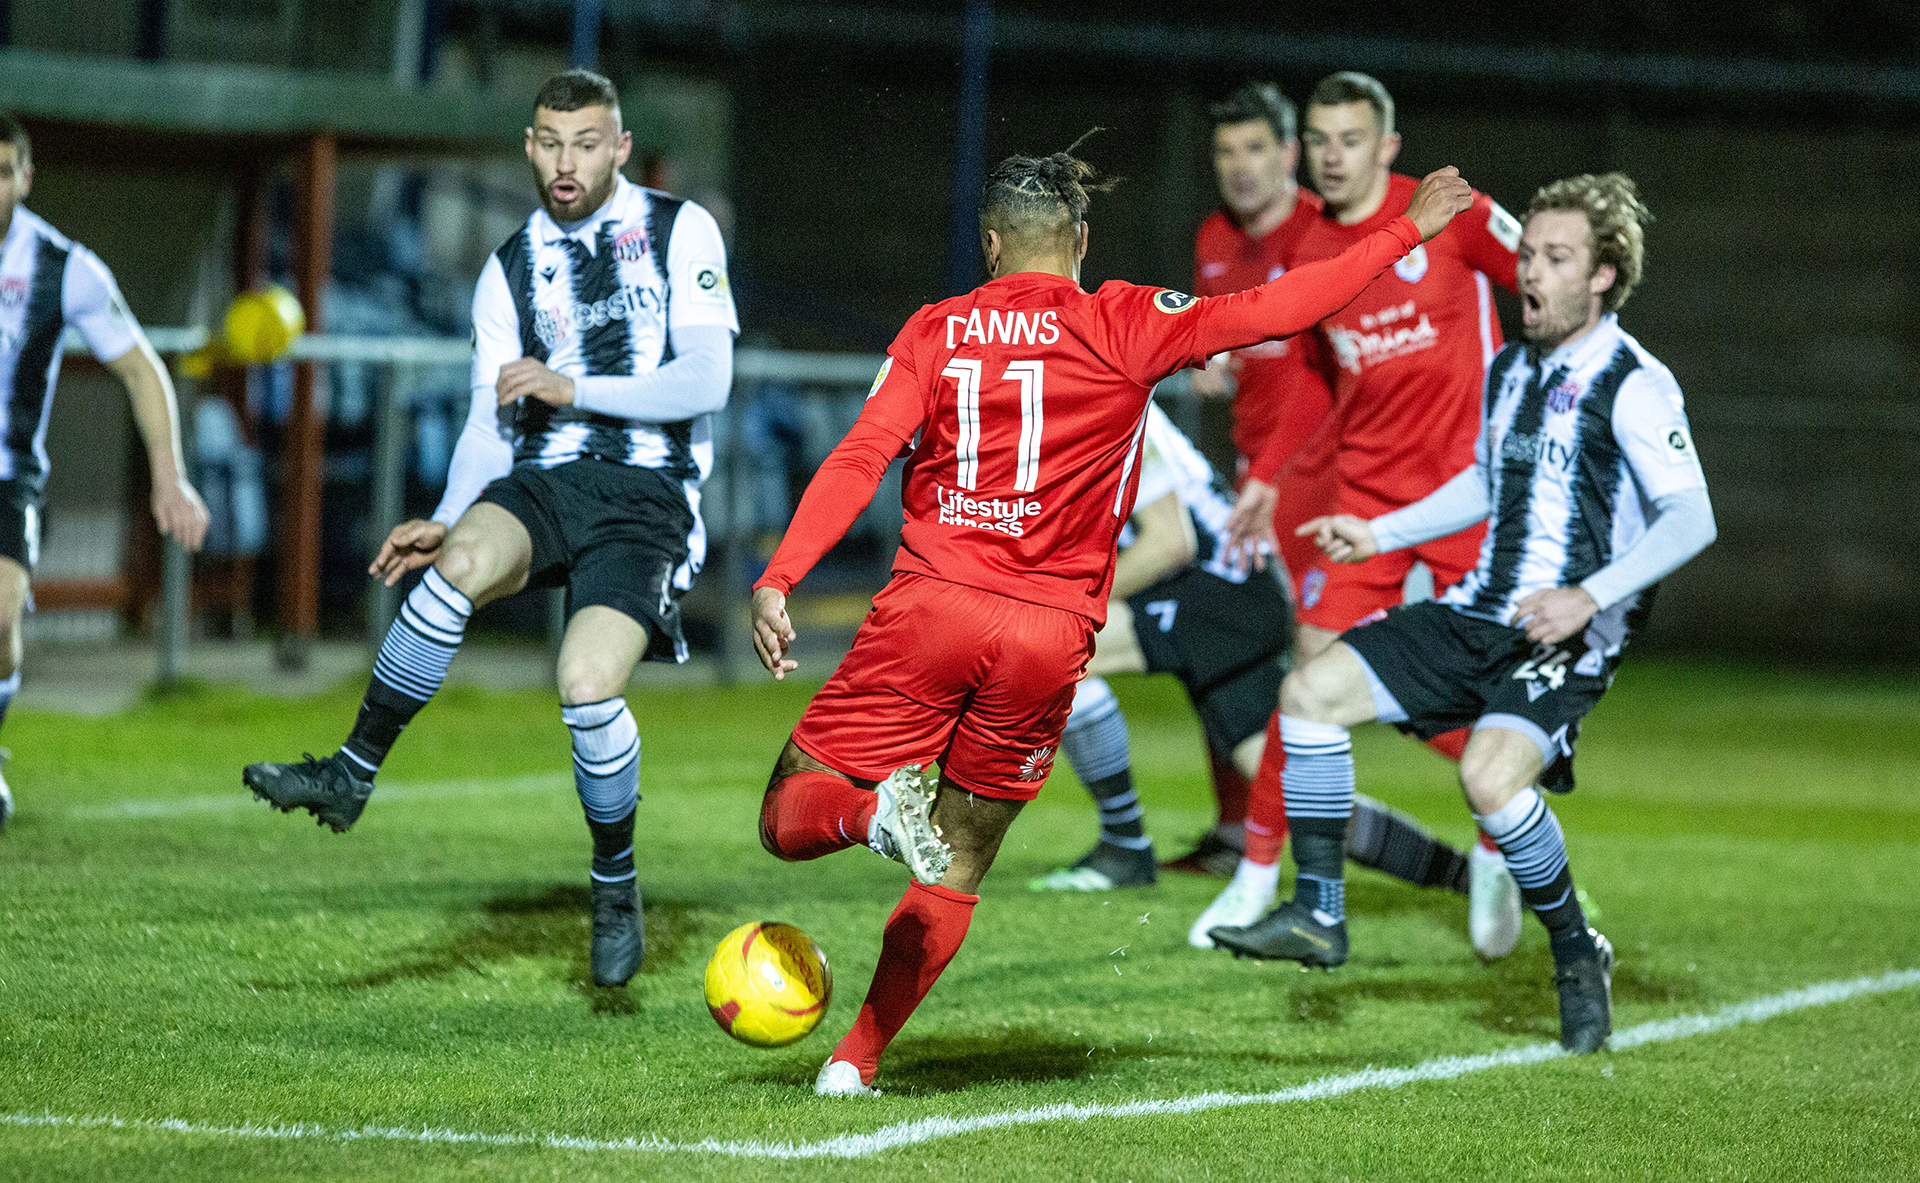 Neil Danns made his first start for The Nomads | © NCM Media